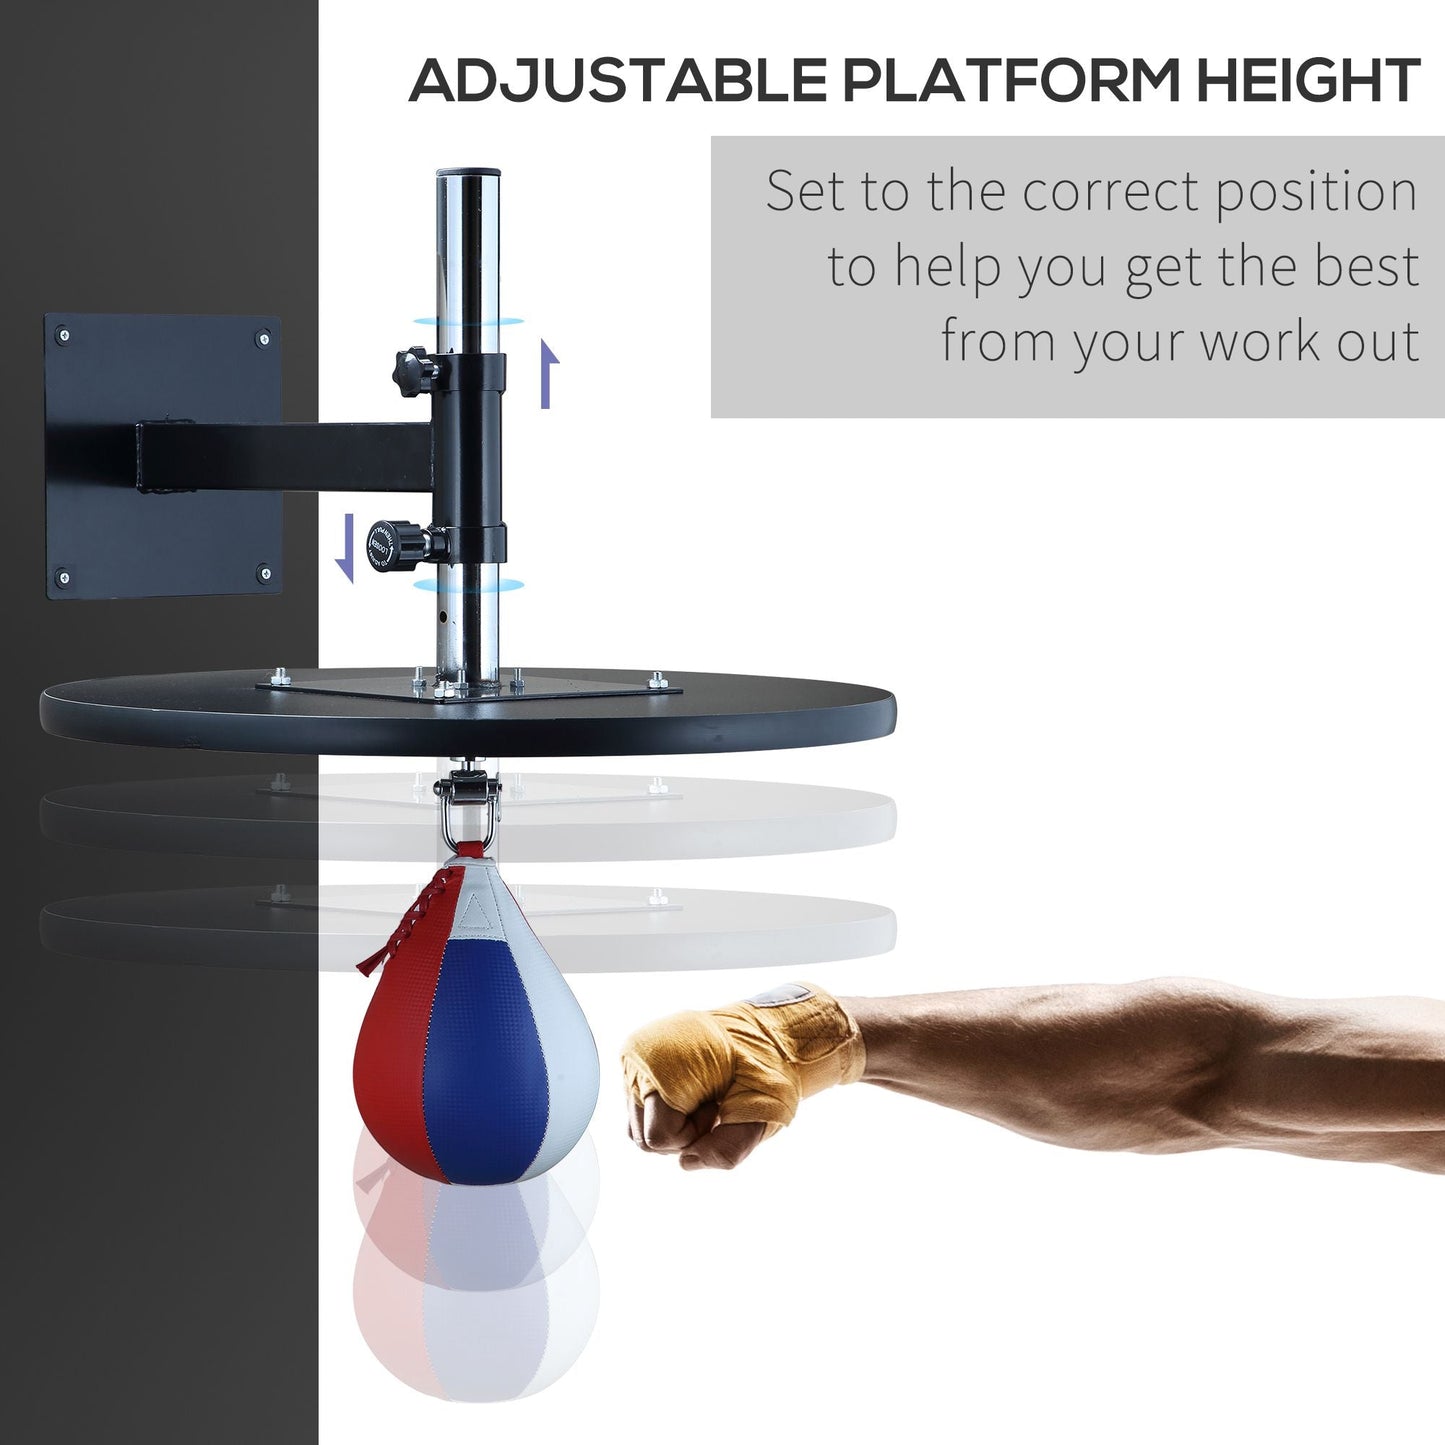 Sports and Fitness-Speed Bag Platform, Wall Mounted Speedball for Boxing, MMA Workout Punching Bag Height Adjustable for Home Gym - Outdoor Style Company